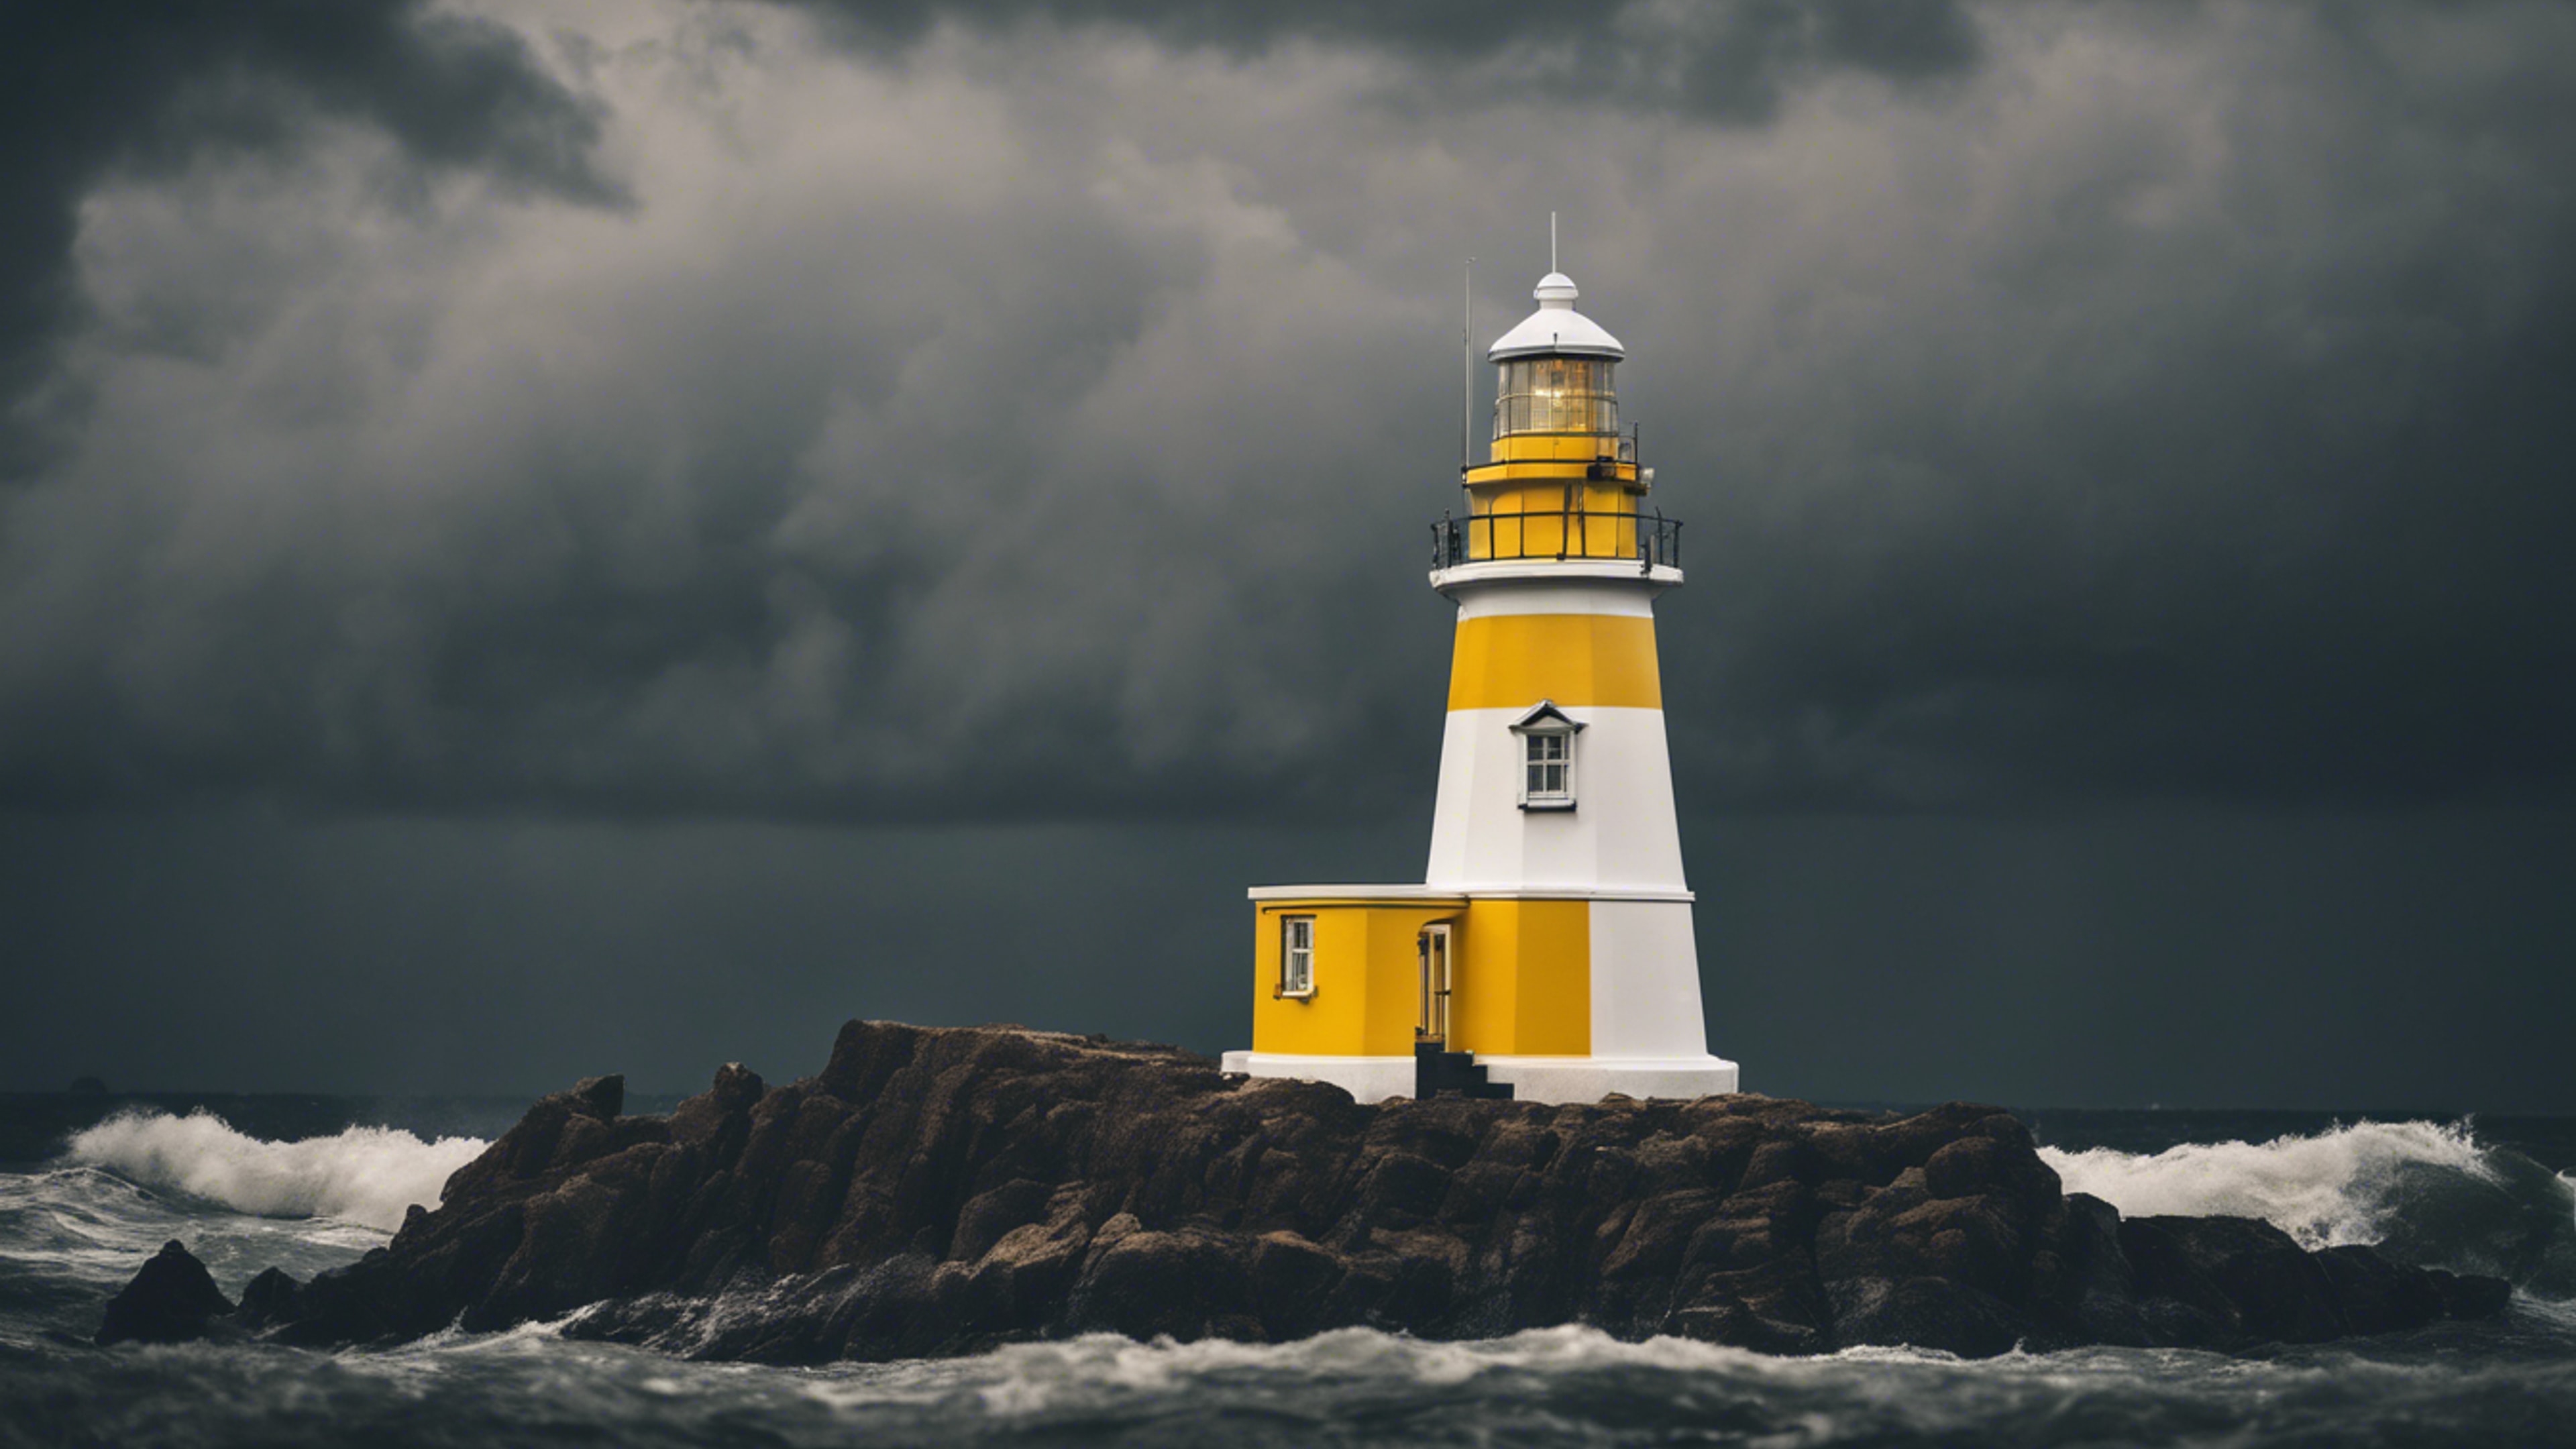 A white and yellow striped lighthouse standing tall against a stormy dark sky.壁紙[29fc73b96f634852baf9]